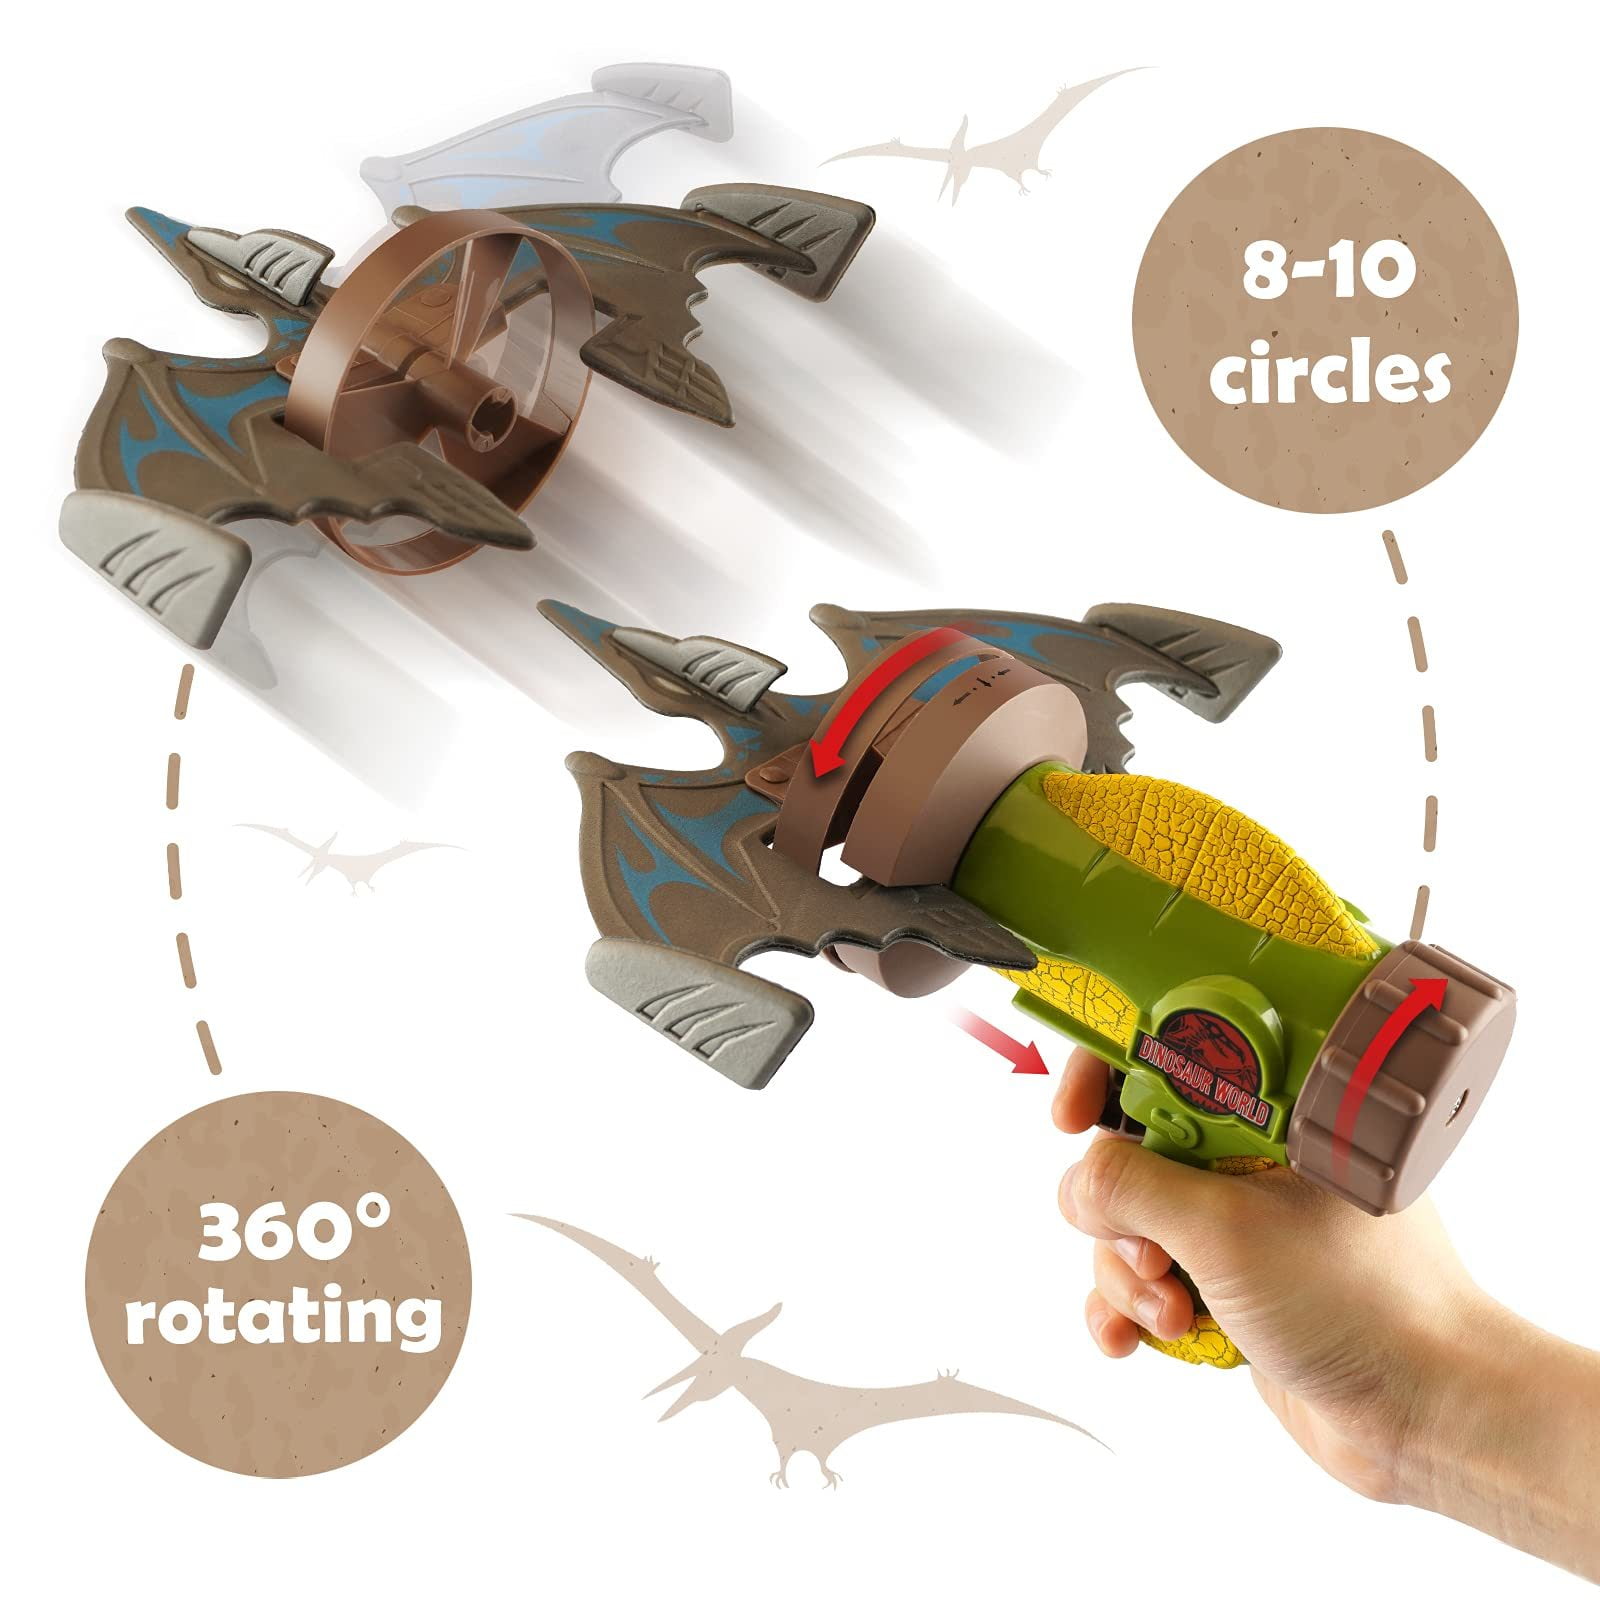 Airplane Launcher Shooting Toy with 4 Dinosaur Targets, 2 Foam Pterosaur Rocket Game for Outdoor - Perfect Kids Toys for Christmas and Easter Gift